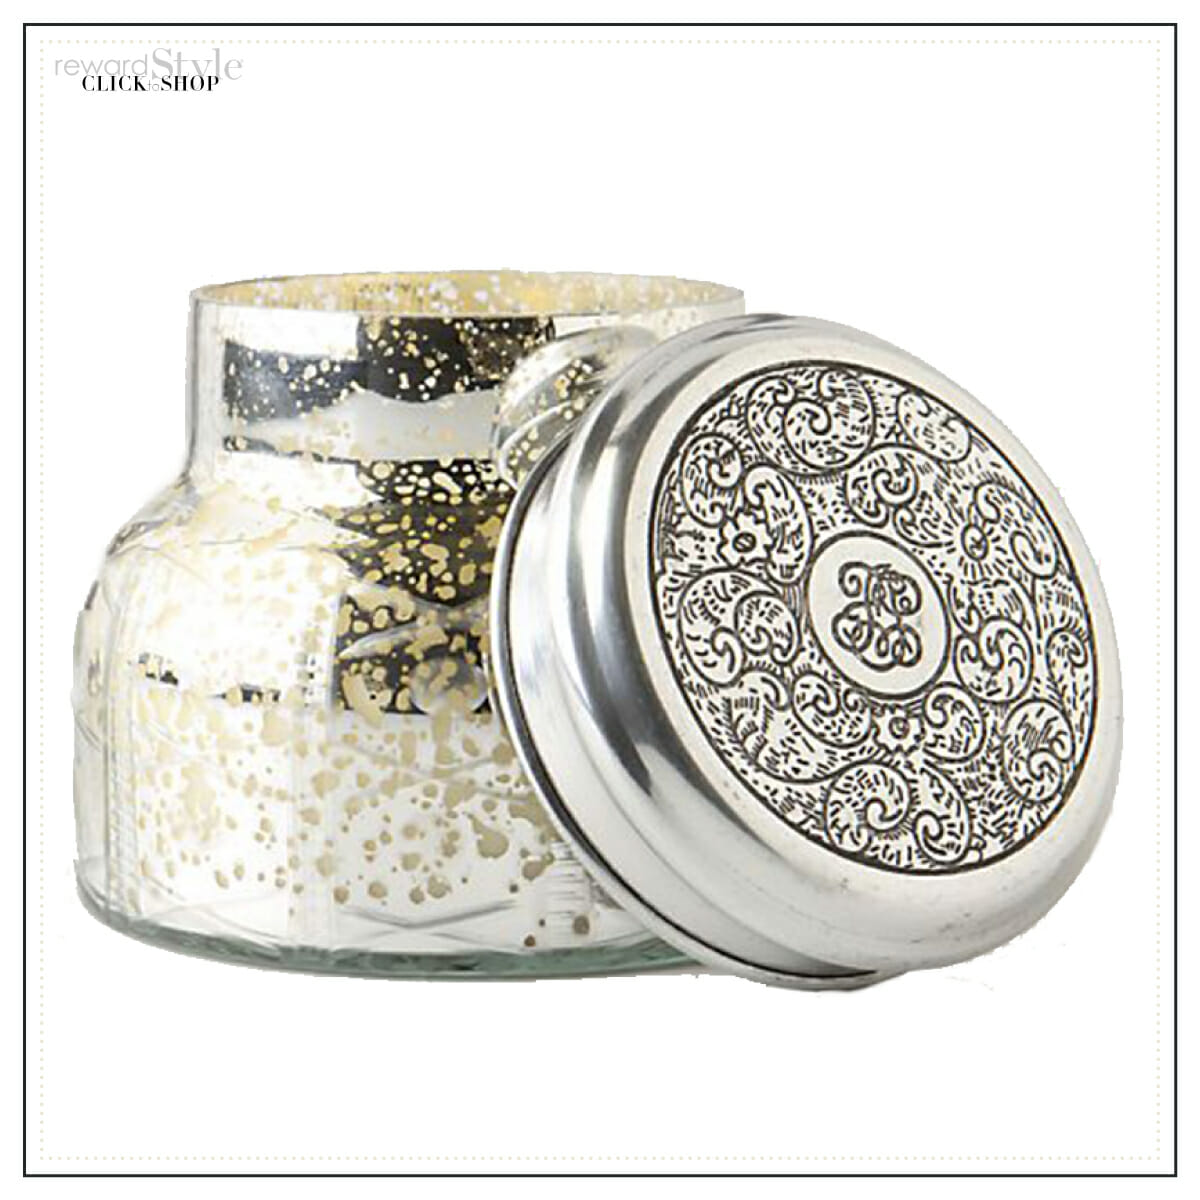 Anthropologie home fragrance candle